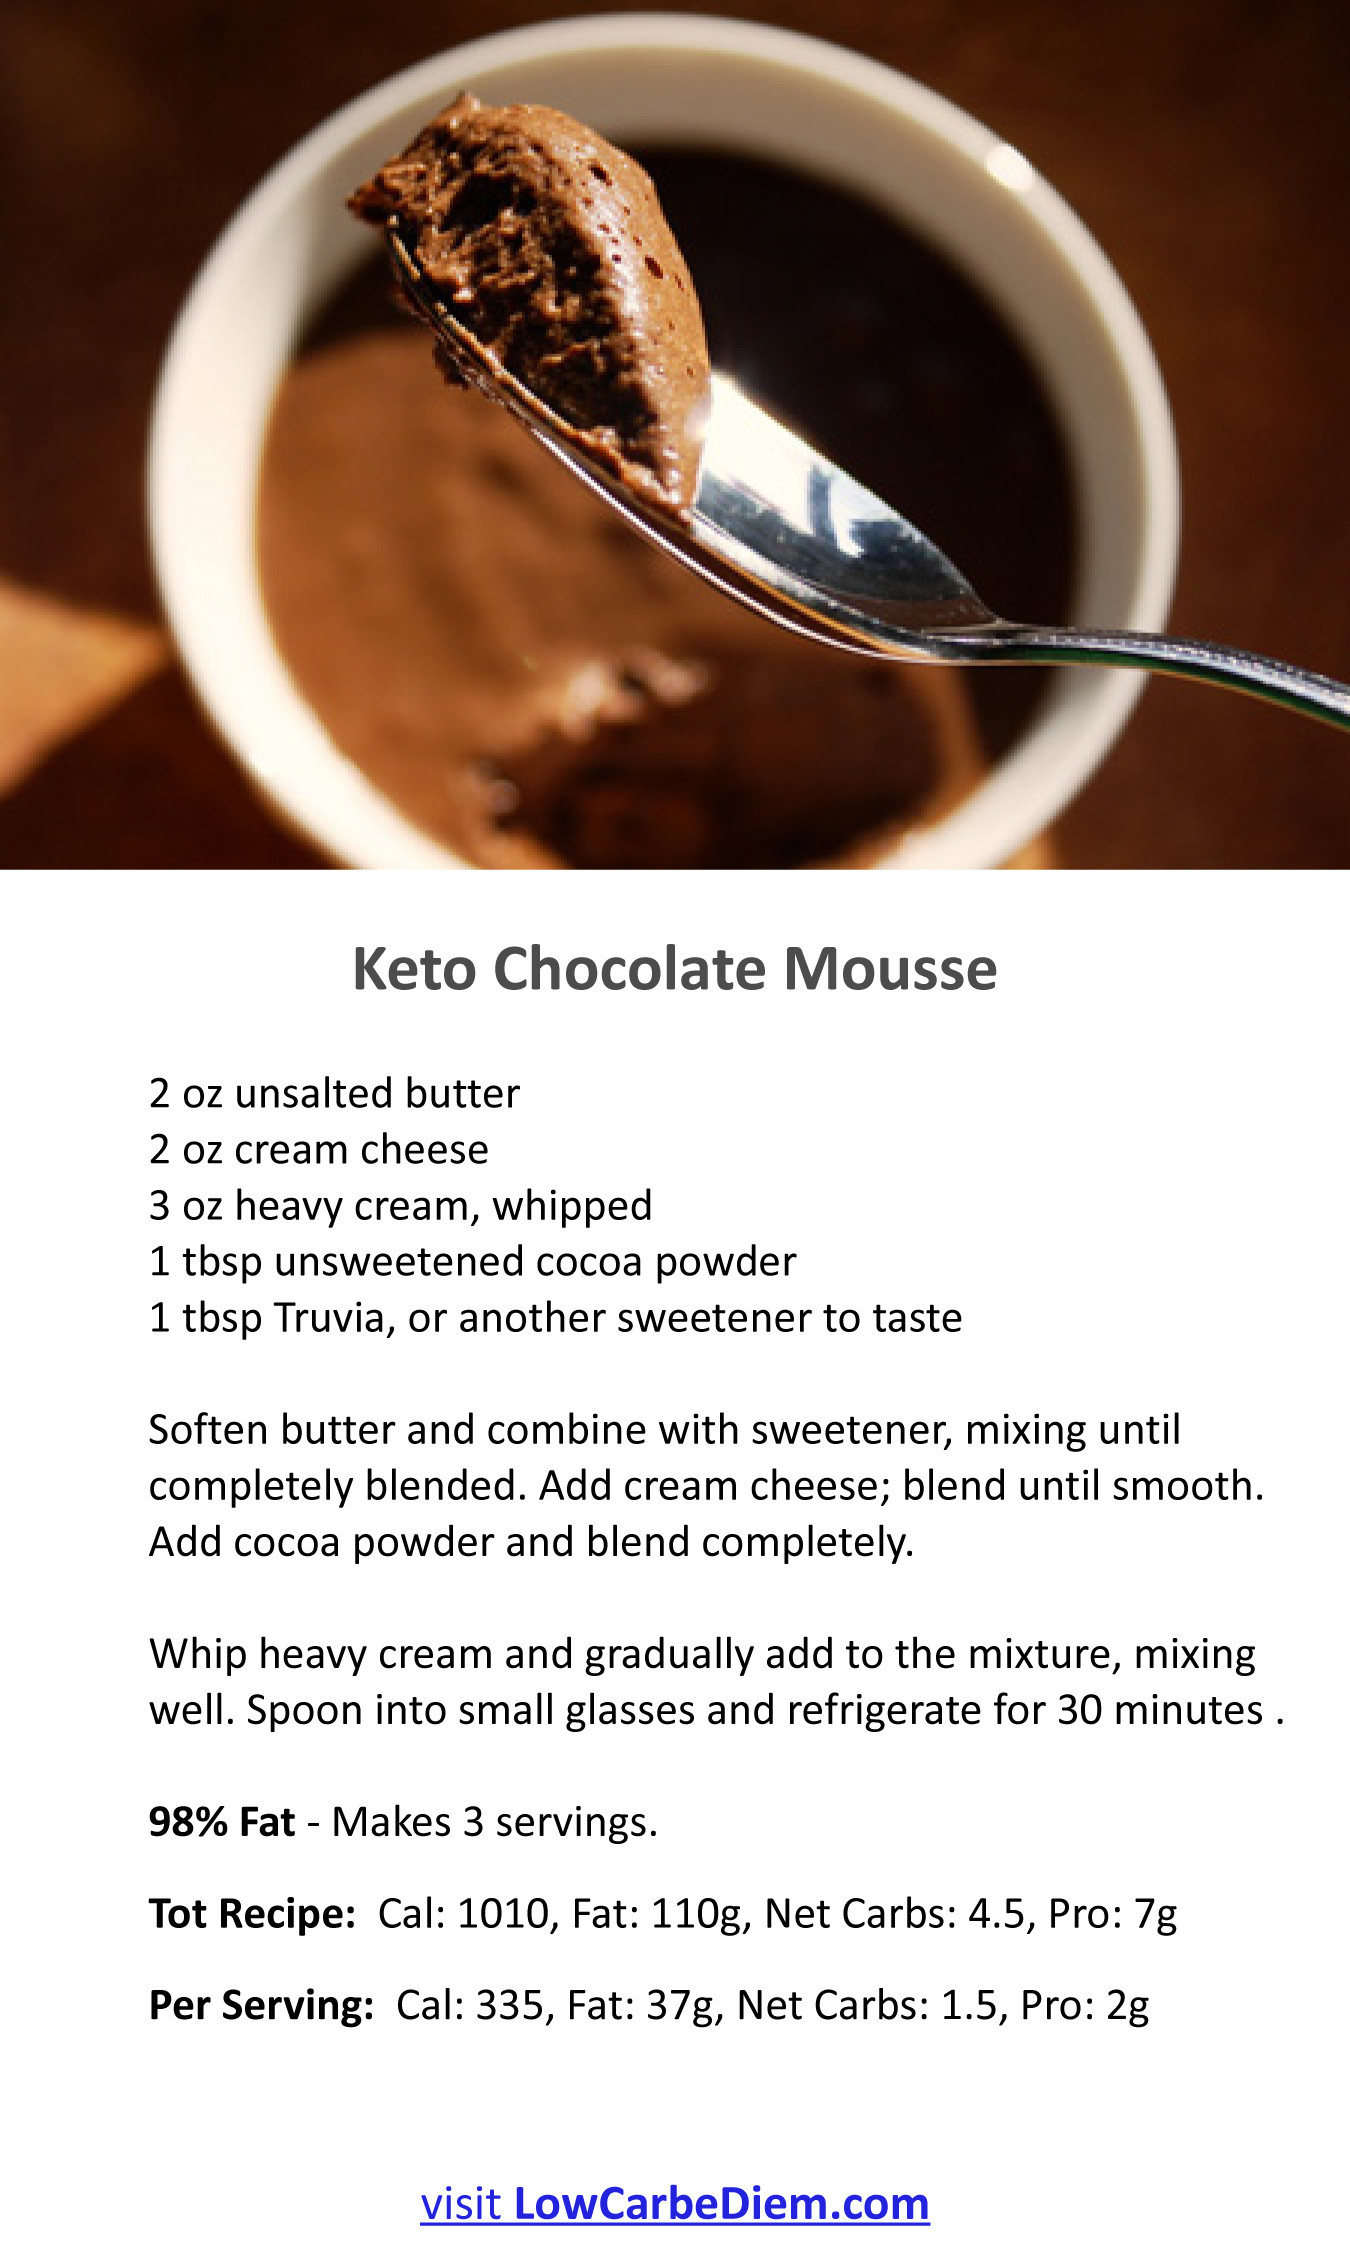 Keto Chocolate Mousse Recipe
 Healthy High Fat Low Carb Foods